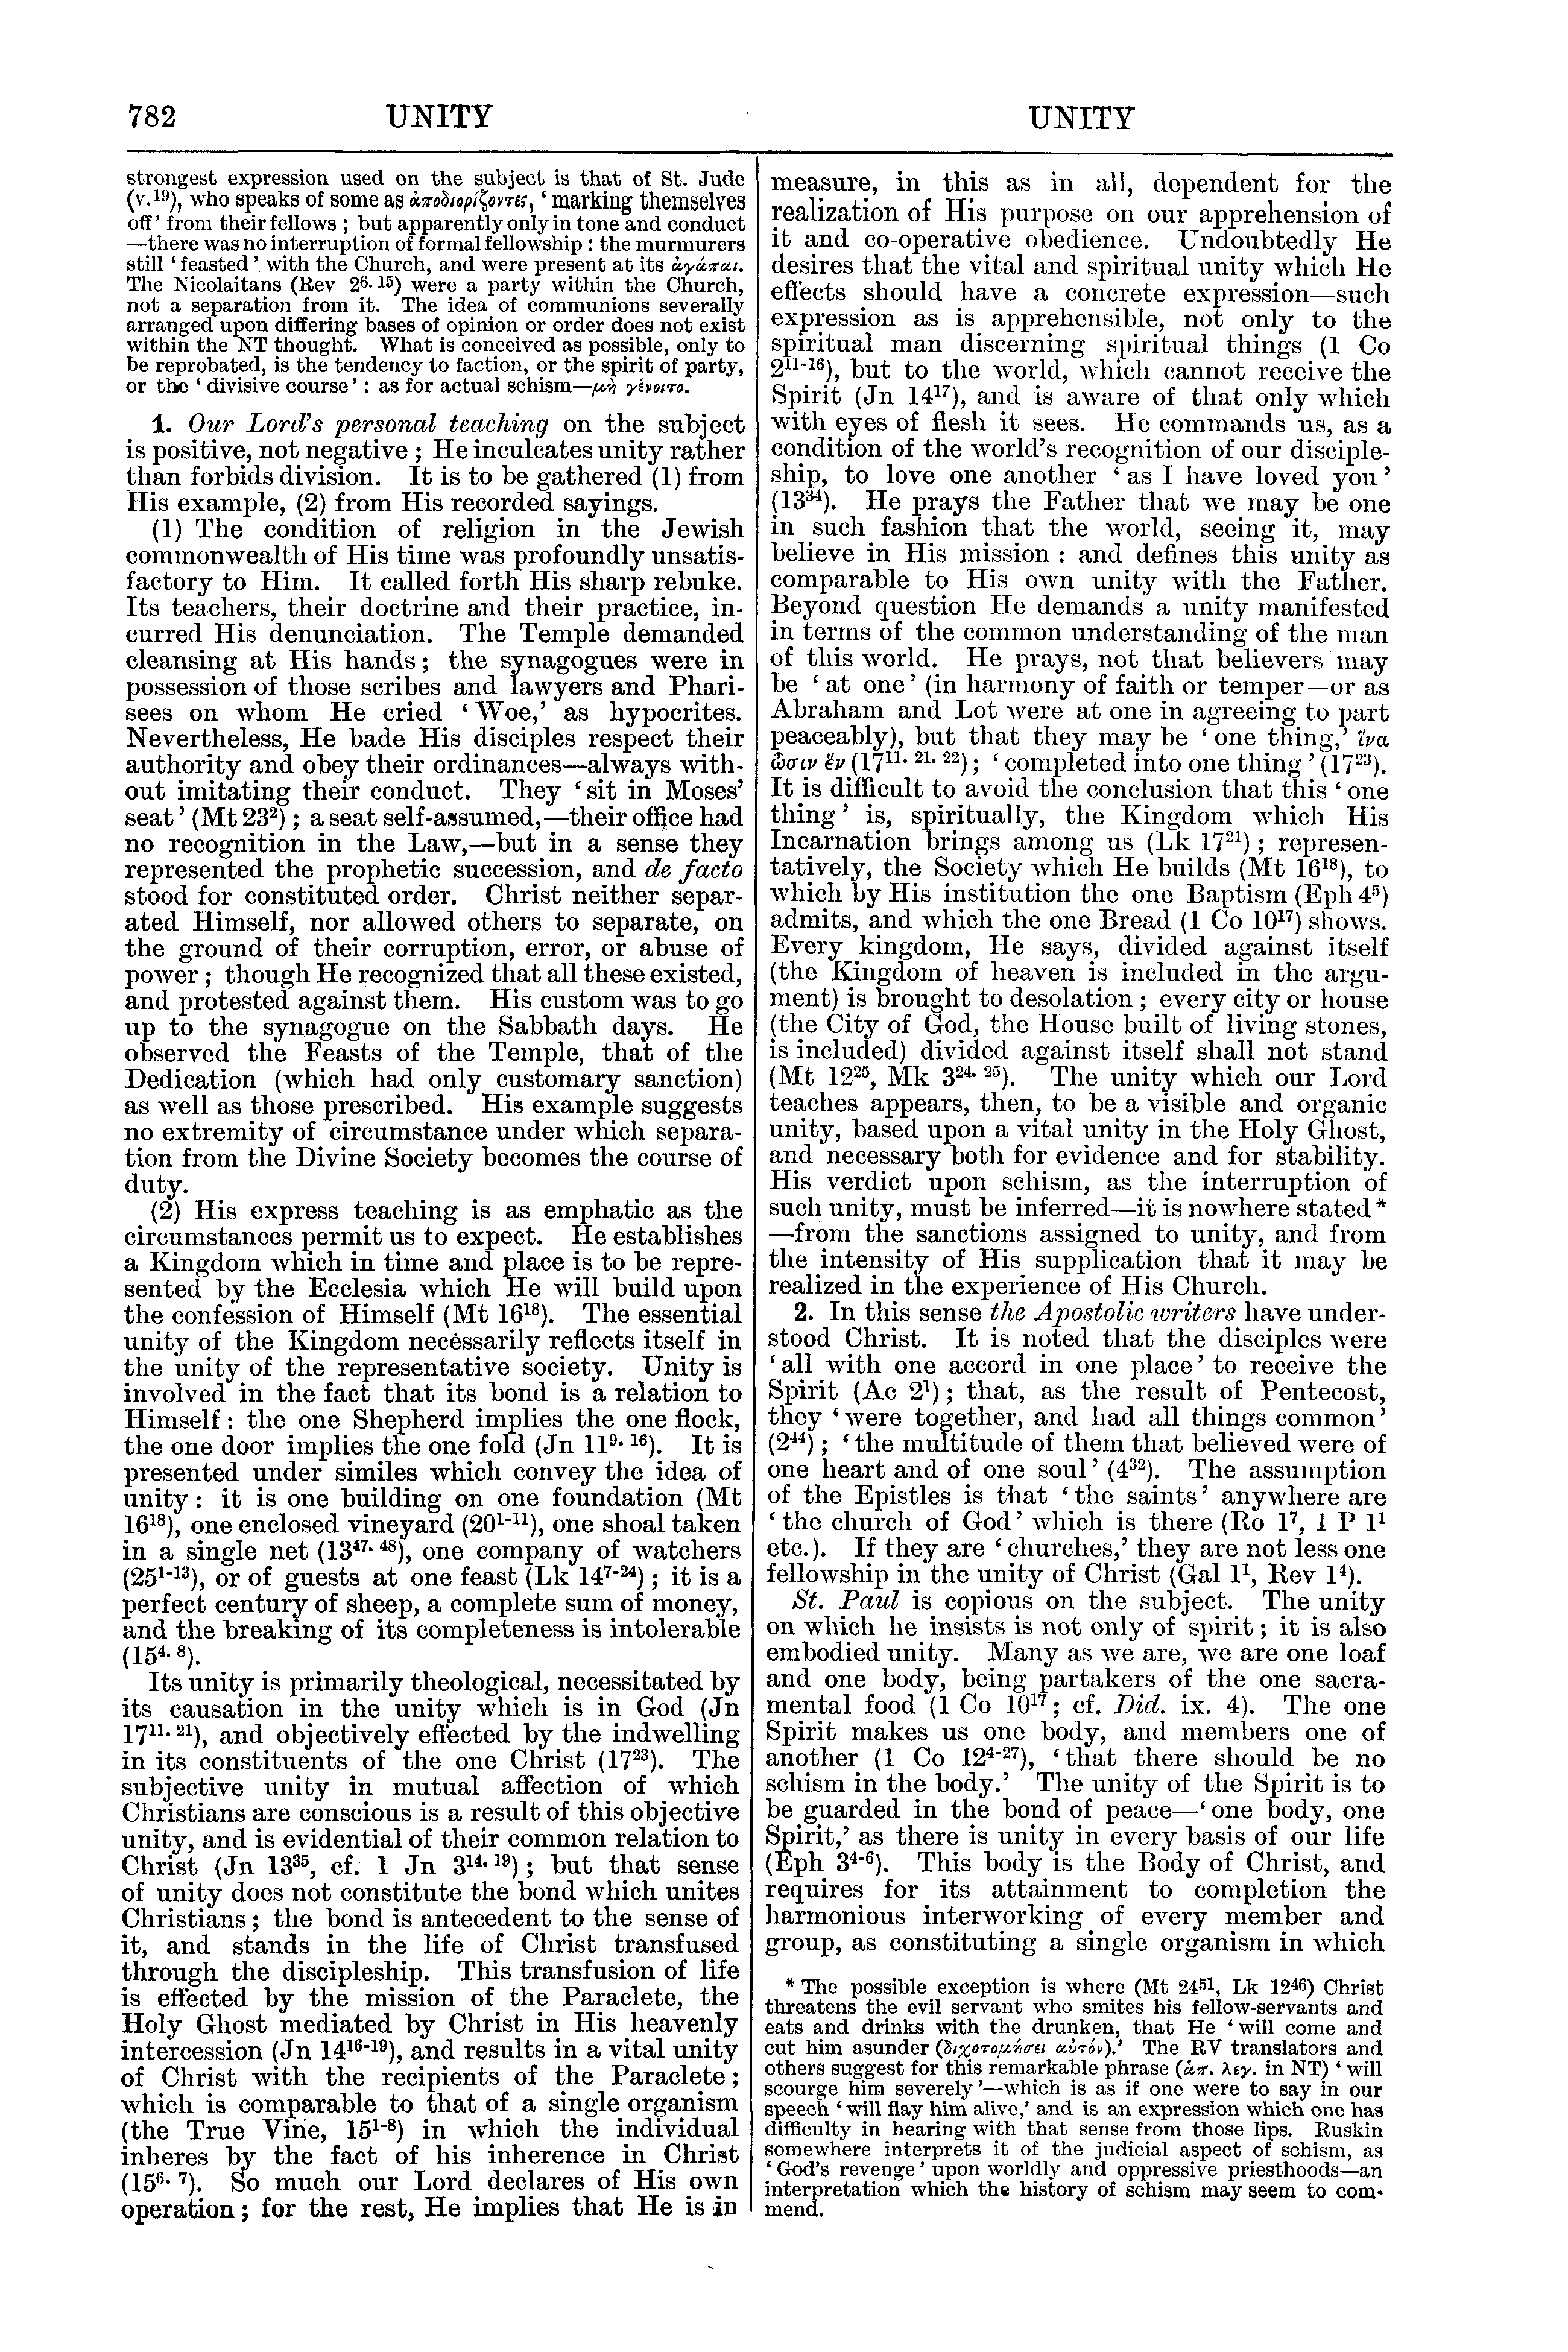 Image of page 782